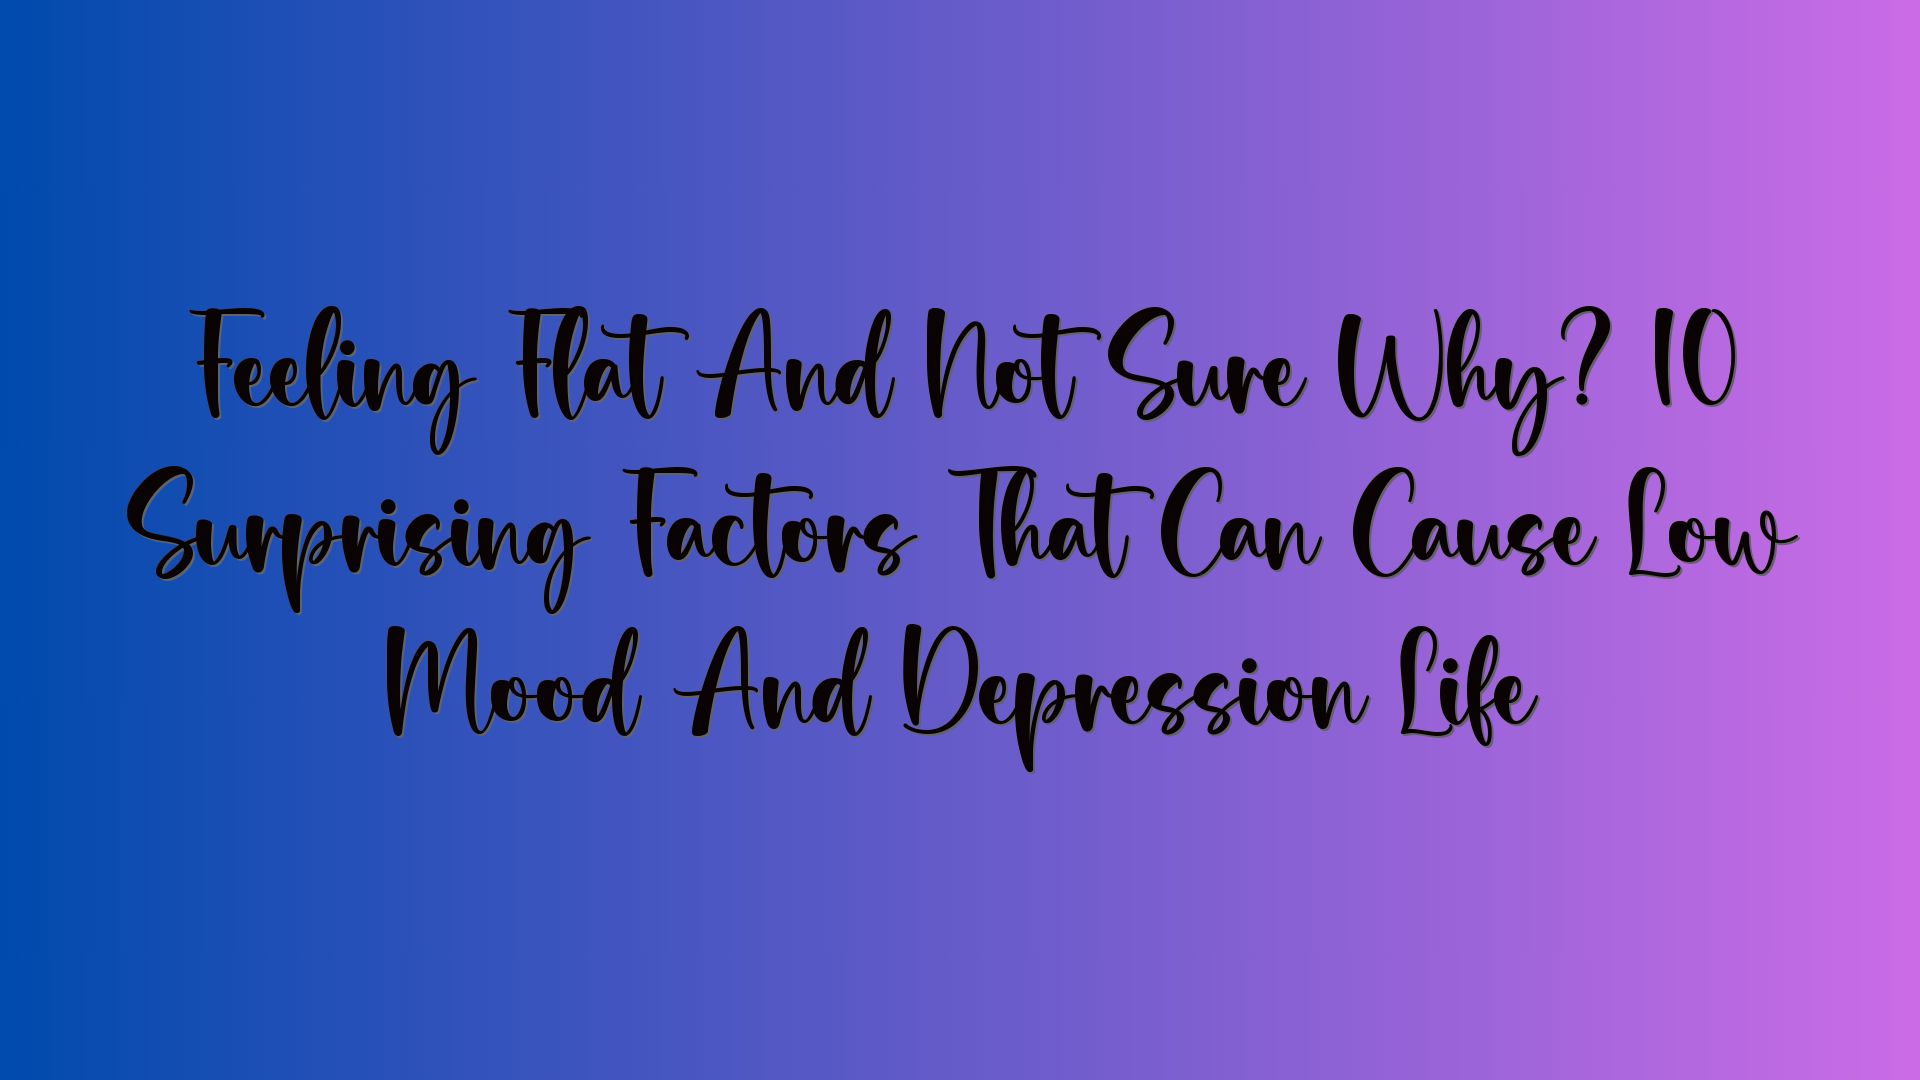 Feeling Flat And Not Sure Why? 10 Surprising Factors That Can Cause Low Mood And Depression Life